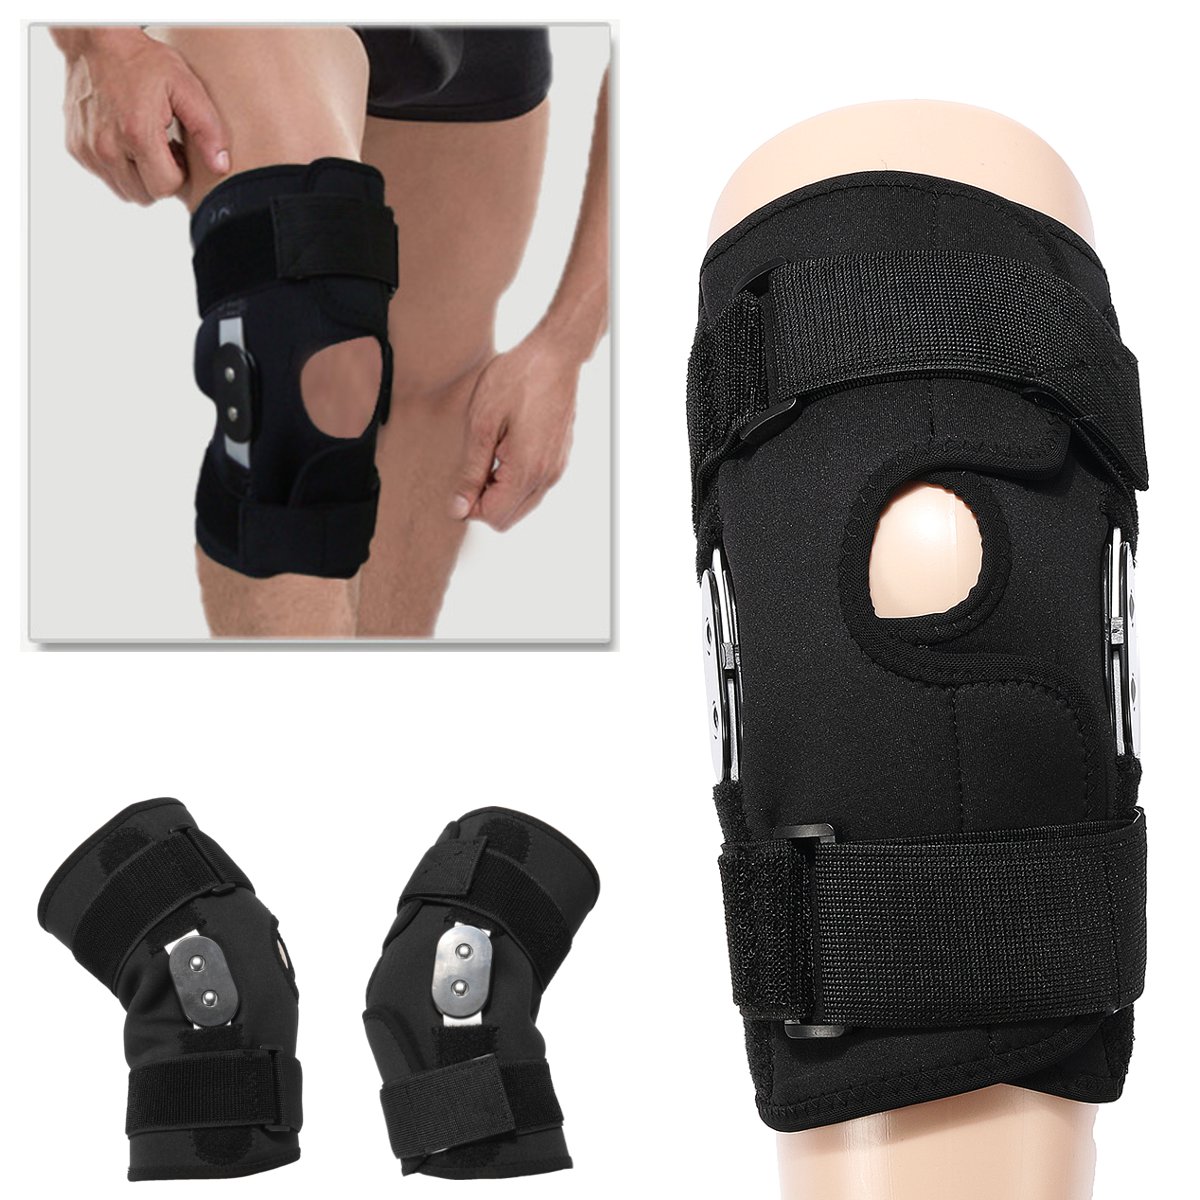 

Double Hinged Full Knee Support Brace Pad Adjustable Aluminium Support Joint Protection